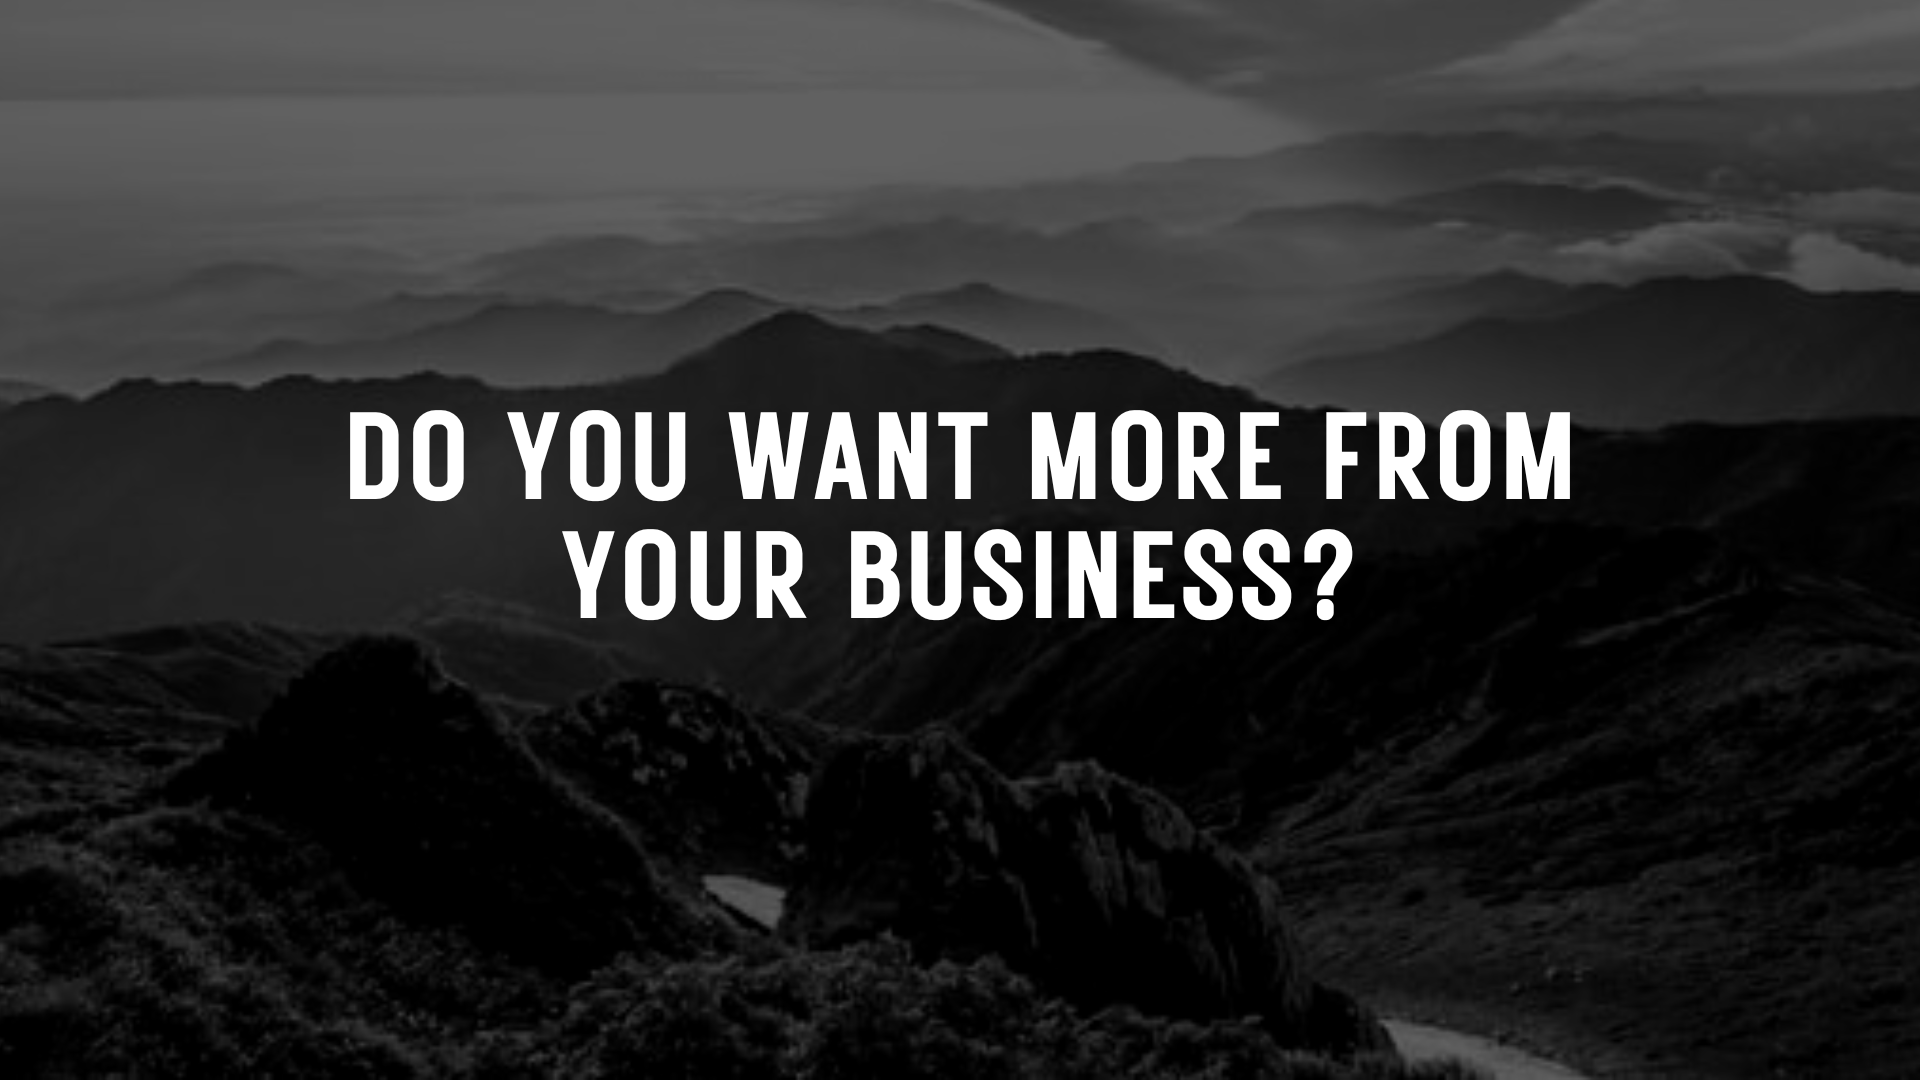 DO YOU WANT MORE FROM YOUR BUSINESS?